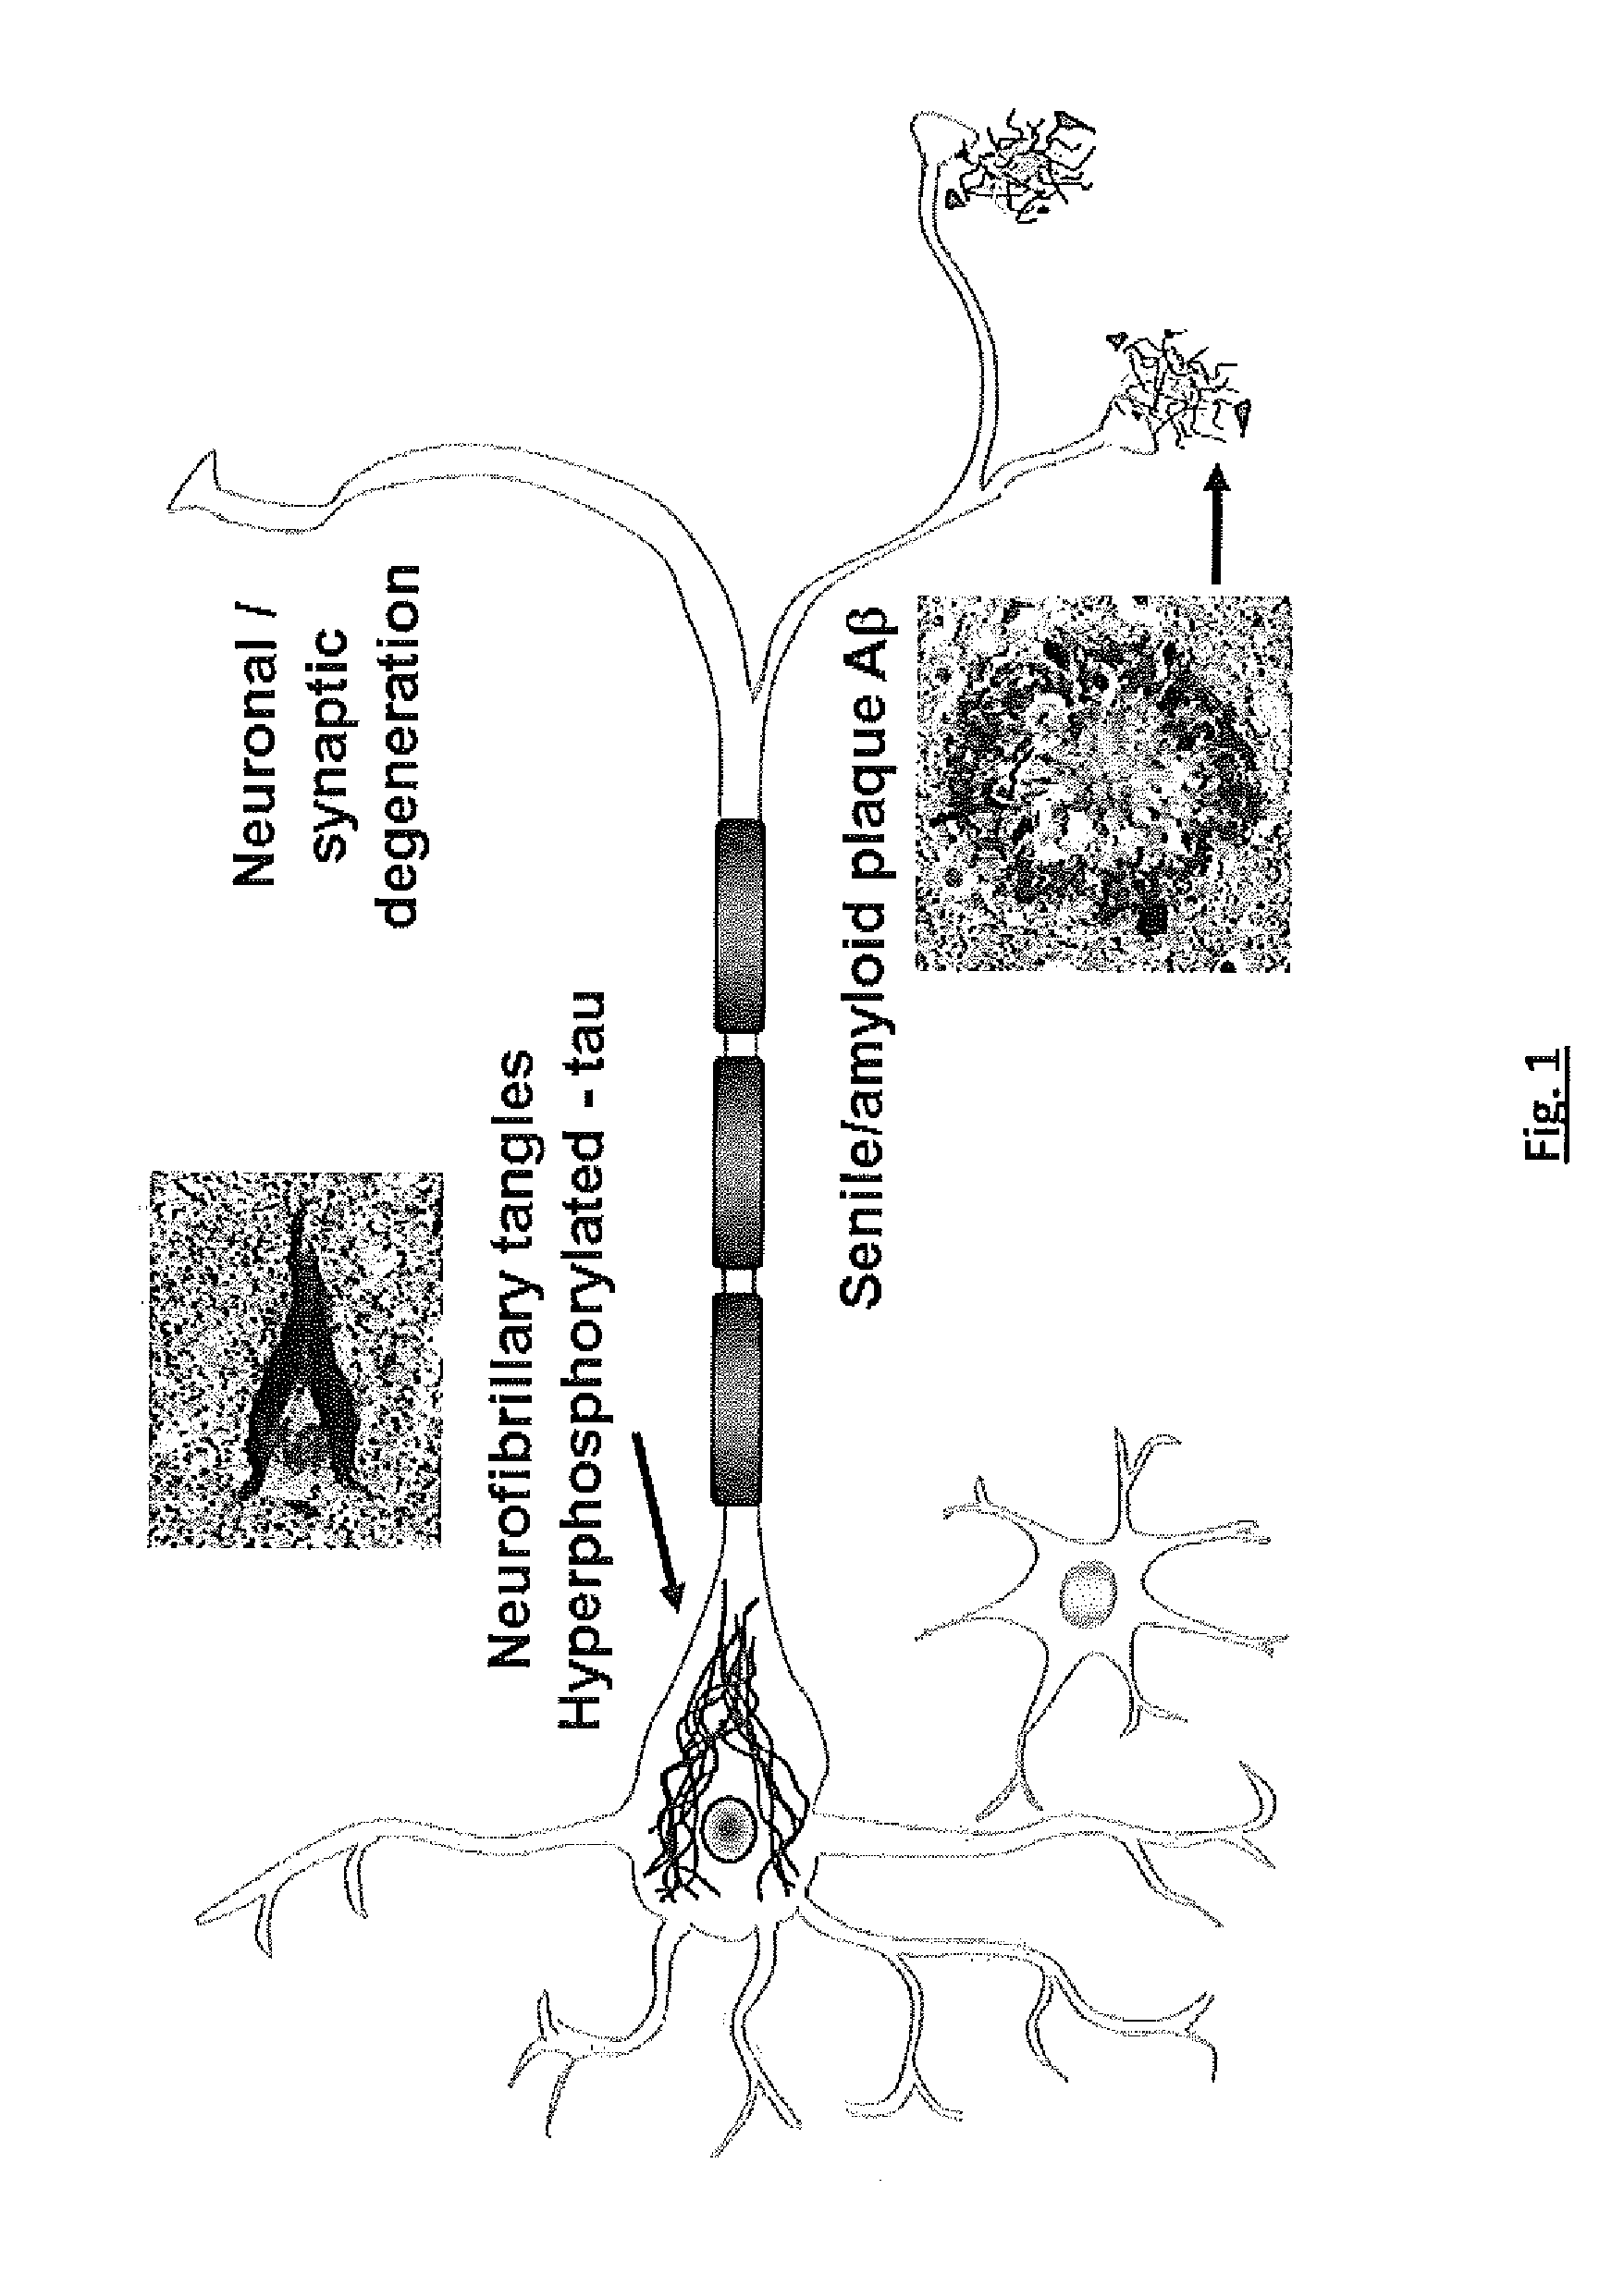 Effective Amounts of (3aR)-1,3a,8-Trimethyl-1,2,3,3a,8,8a-hexahydropyrrolo [2,3-b]indol-5-yl Phenylcarbamate and Methods of Treating or Preventing Neurodegeneration